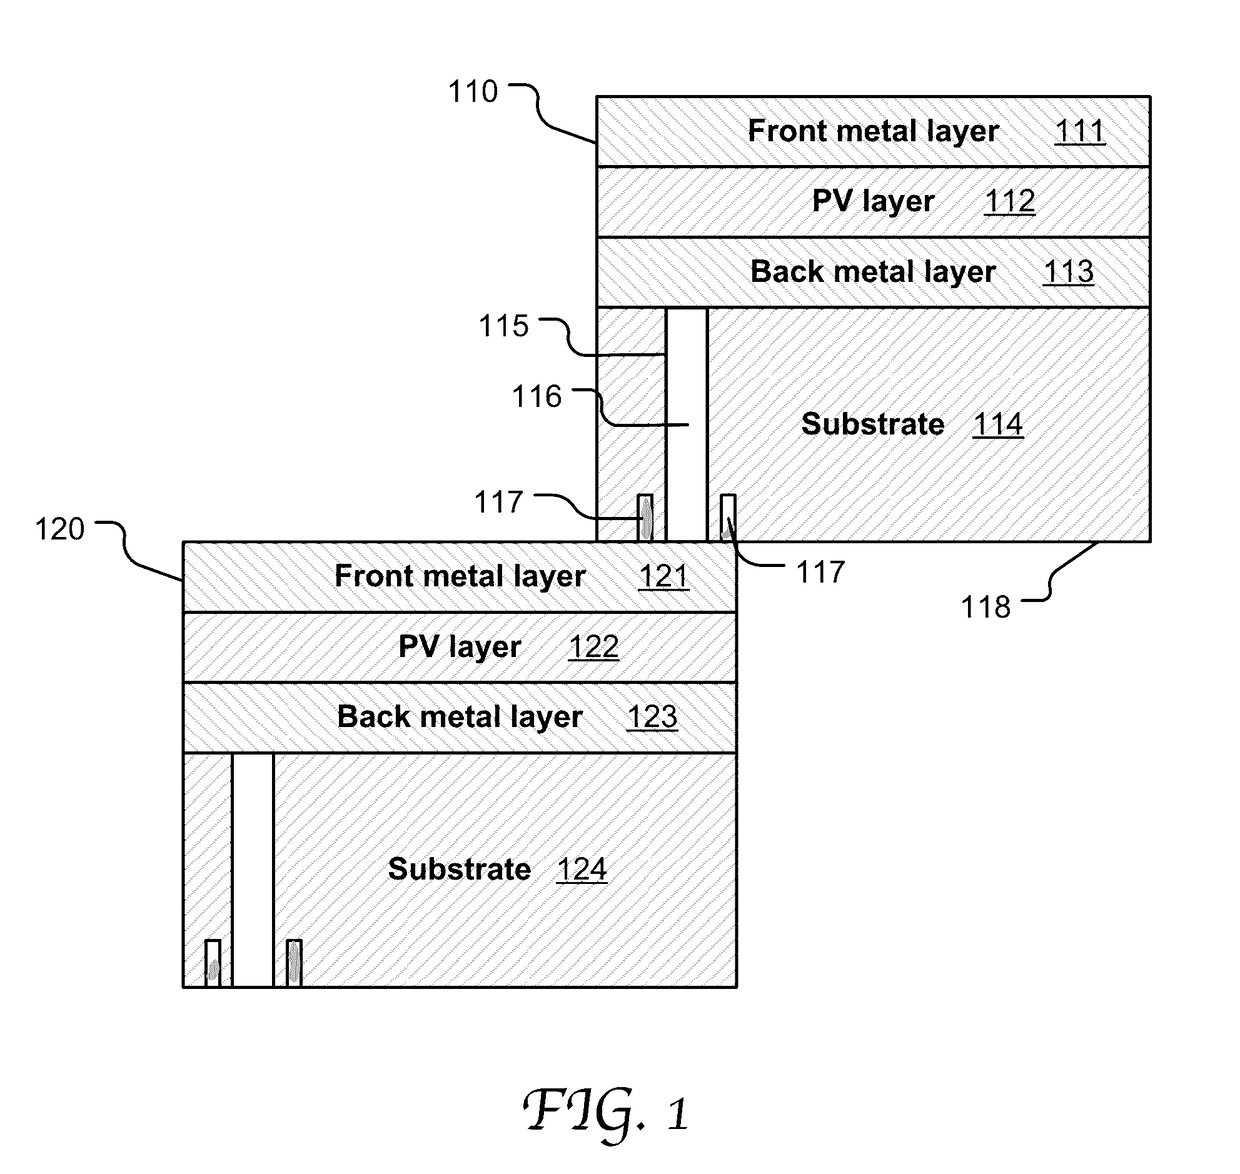 Via structures for solar cell interconnection in solar module